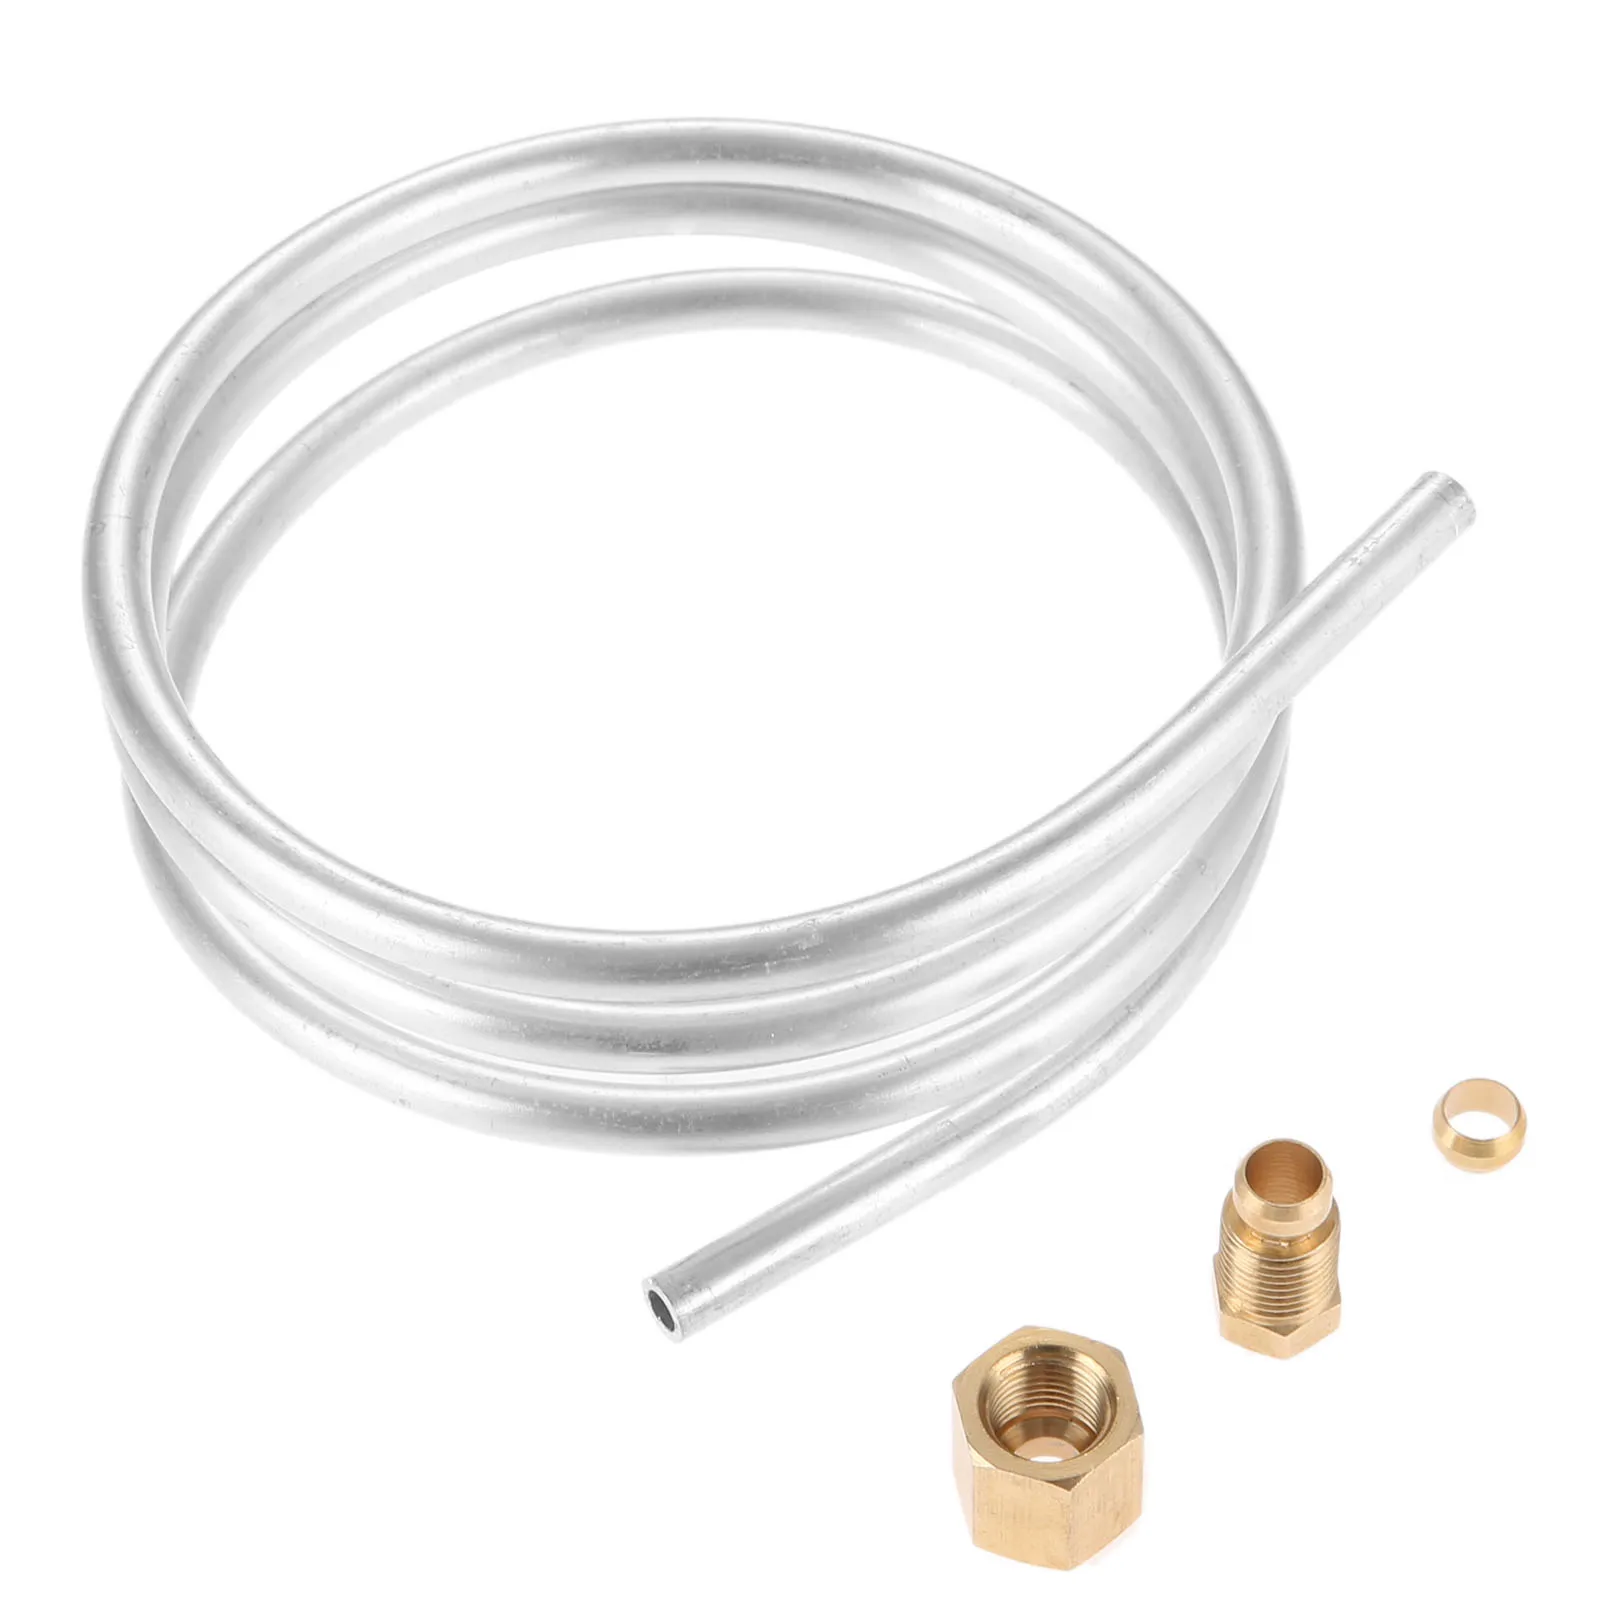 

Pilot Burner 1/4 Aluminum Tubing With Fittings M10x1 Female And Male Length 1 Meter For Valve Connection Aluminum Solid Brass